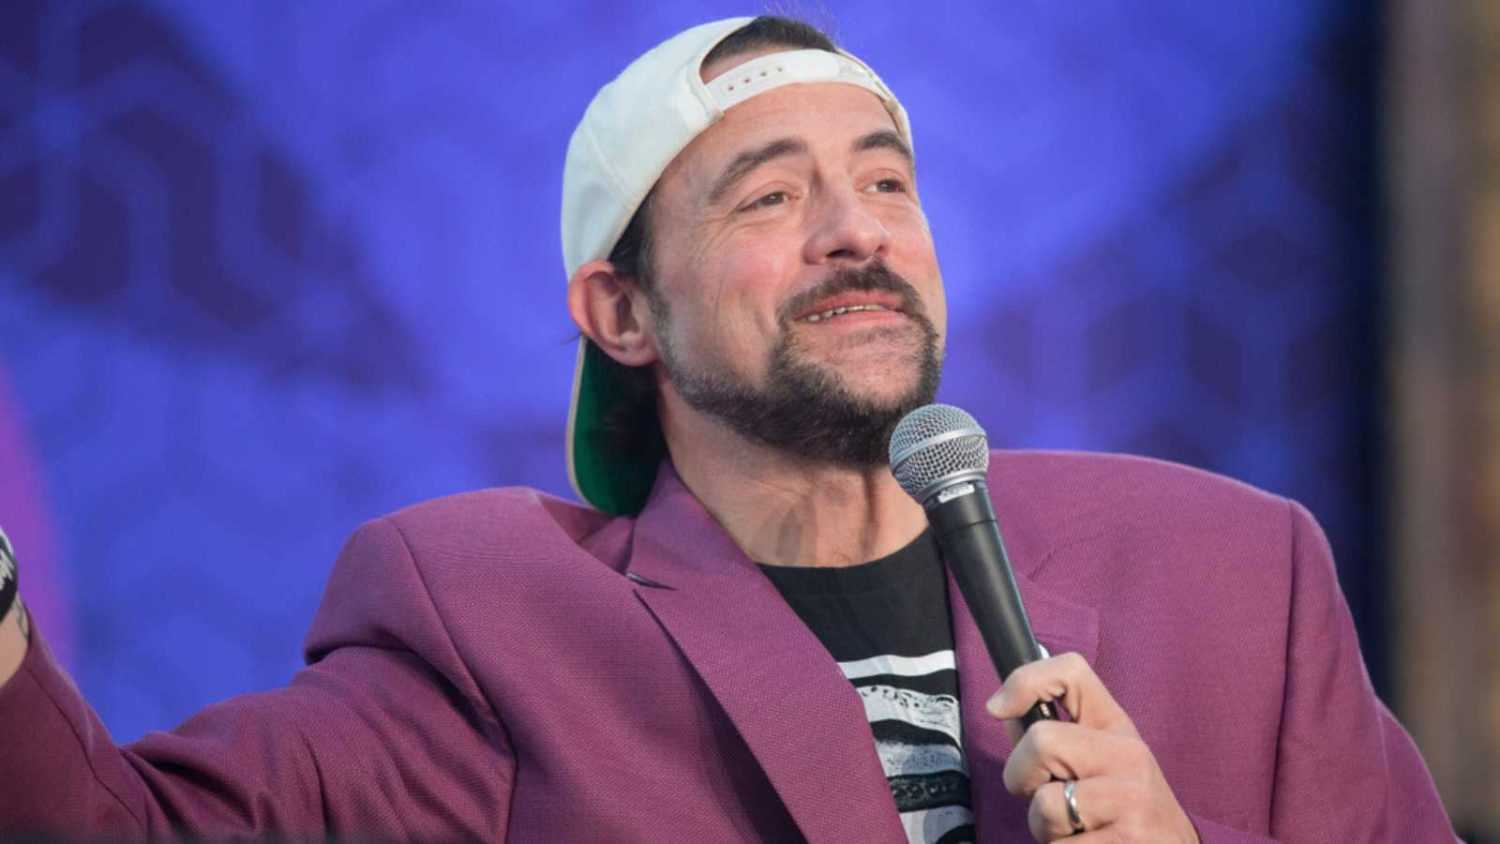 Santa Rosa, CA/USA - 12/15/2018: Kevin Smith performs SModcast live at The Emerald Cup. He's known for his movies Mallrats, Chasing Amy, Dogma, Jay and Silent Bob Strike Back.